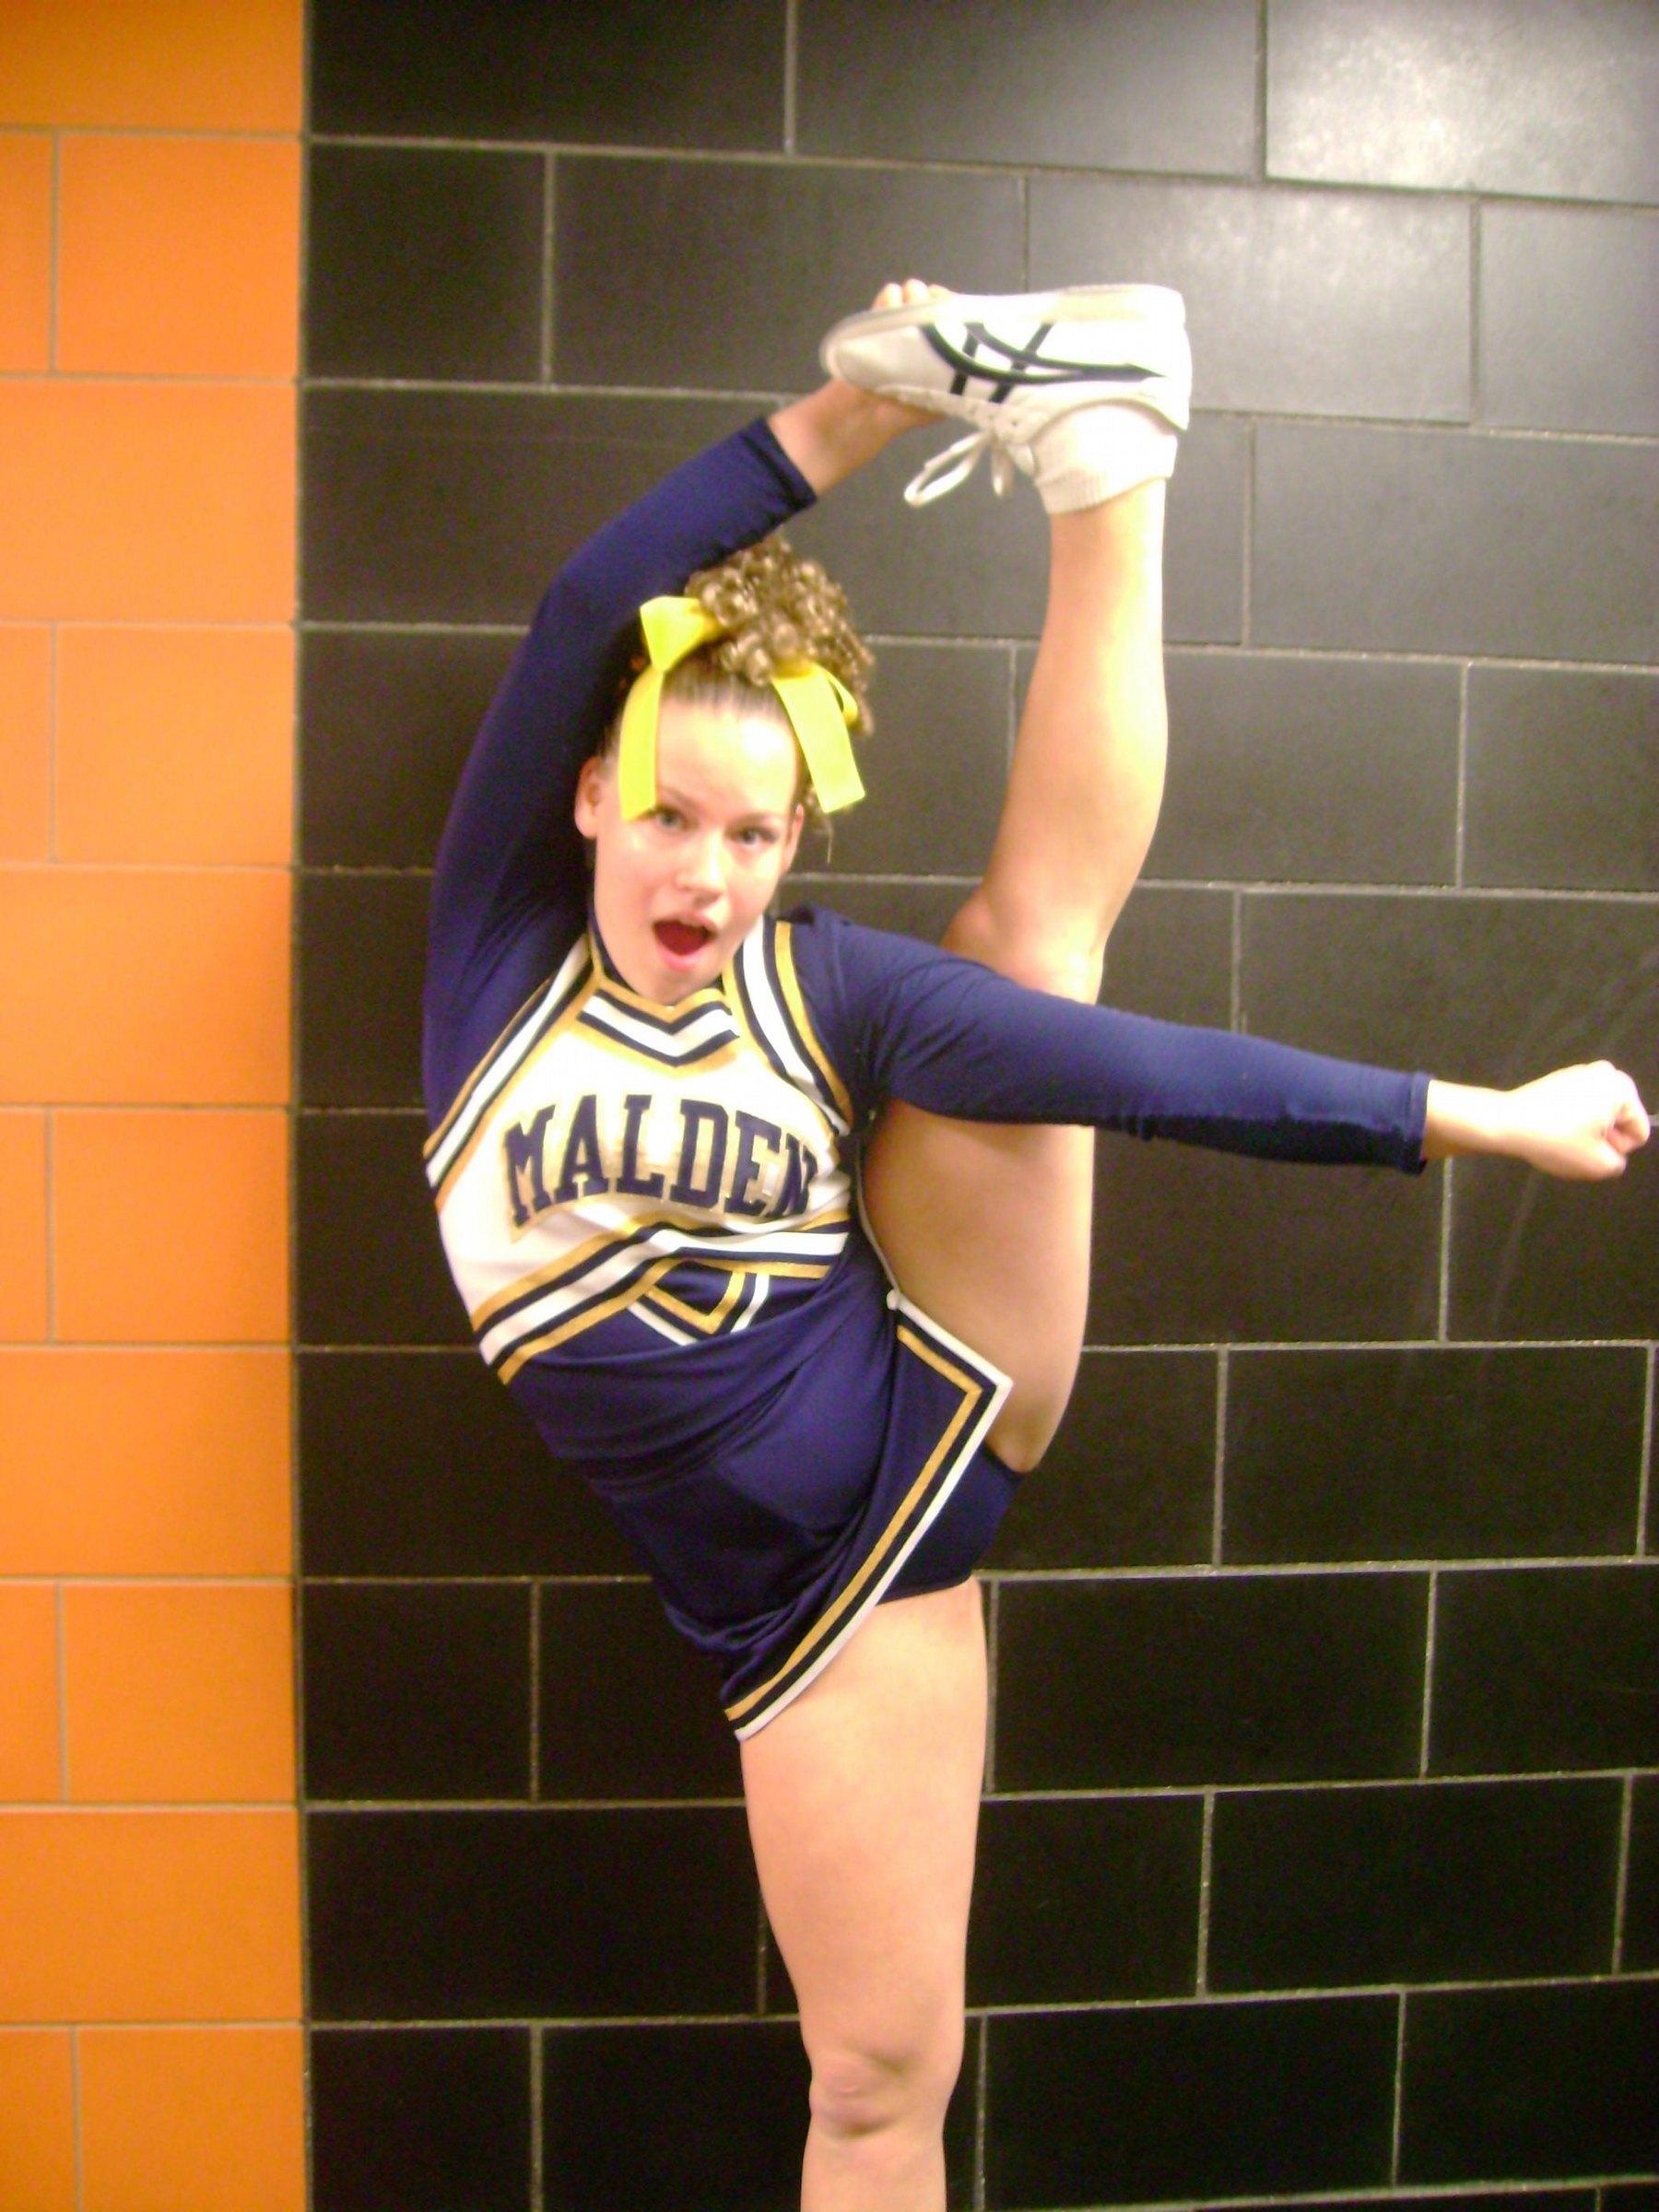 best of Crotch pics cheerleader Young